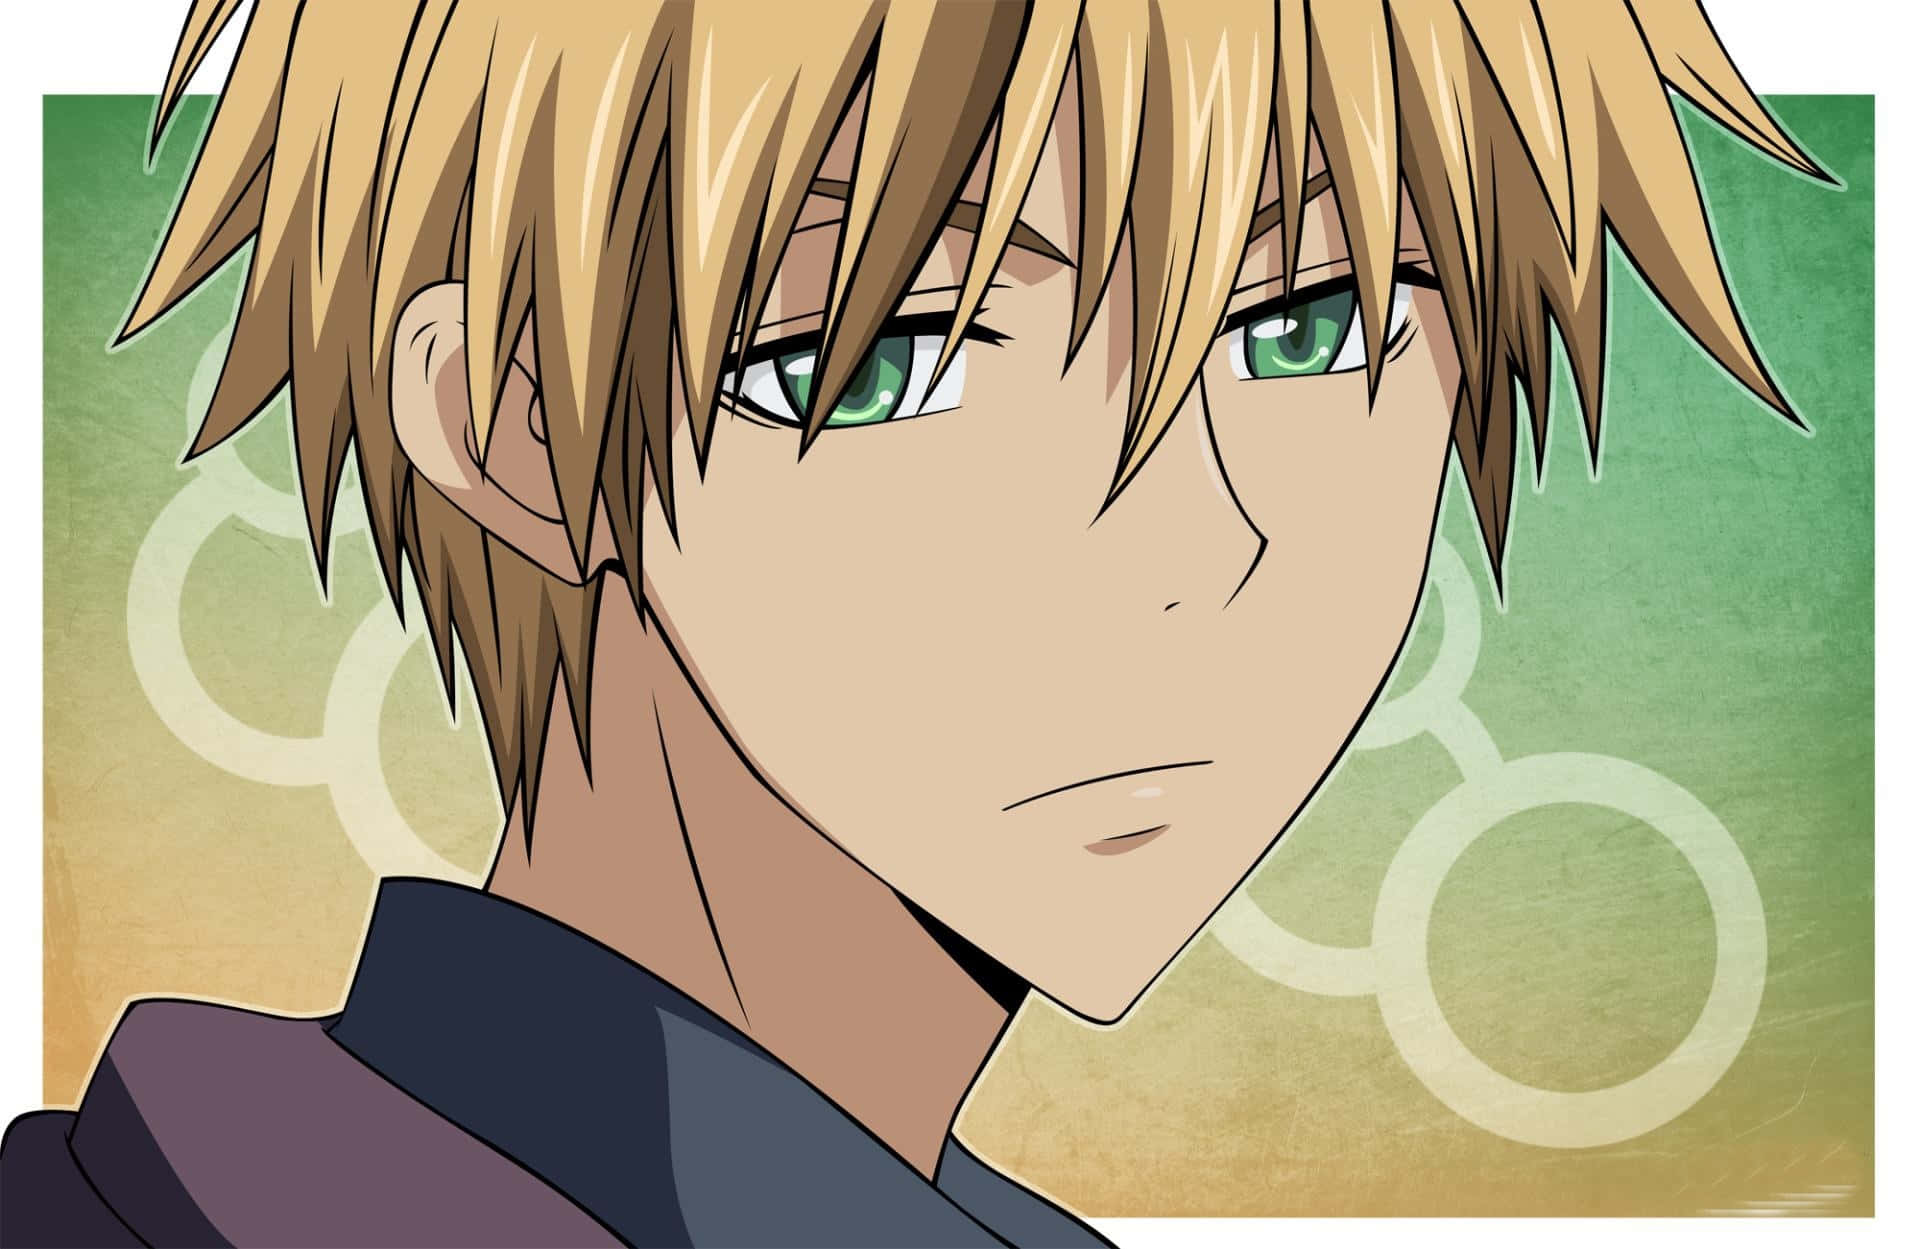 A Boy With Blonde Hair And Green Eyes